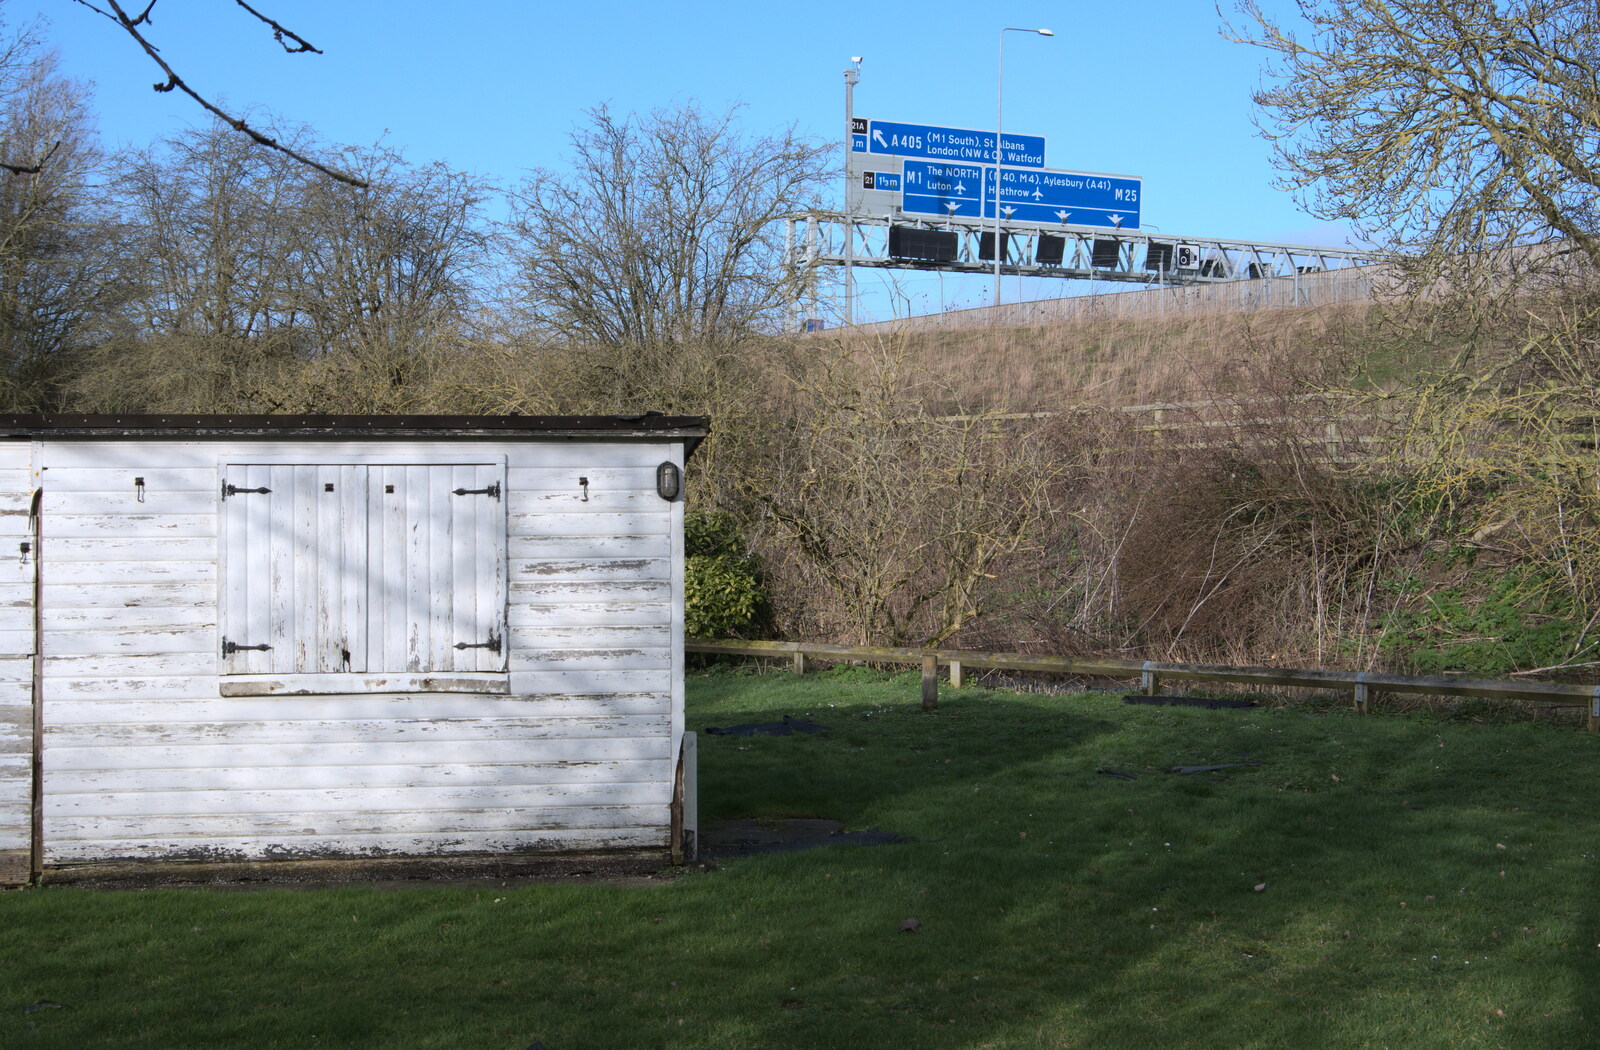 M25 signs next to the Bricket Wood Beafeater from HMS Belfast and the South Bank, Southwark, London - 17th February 2020